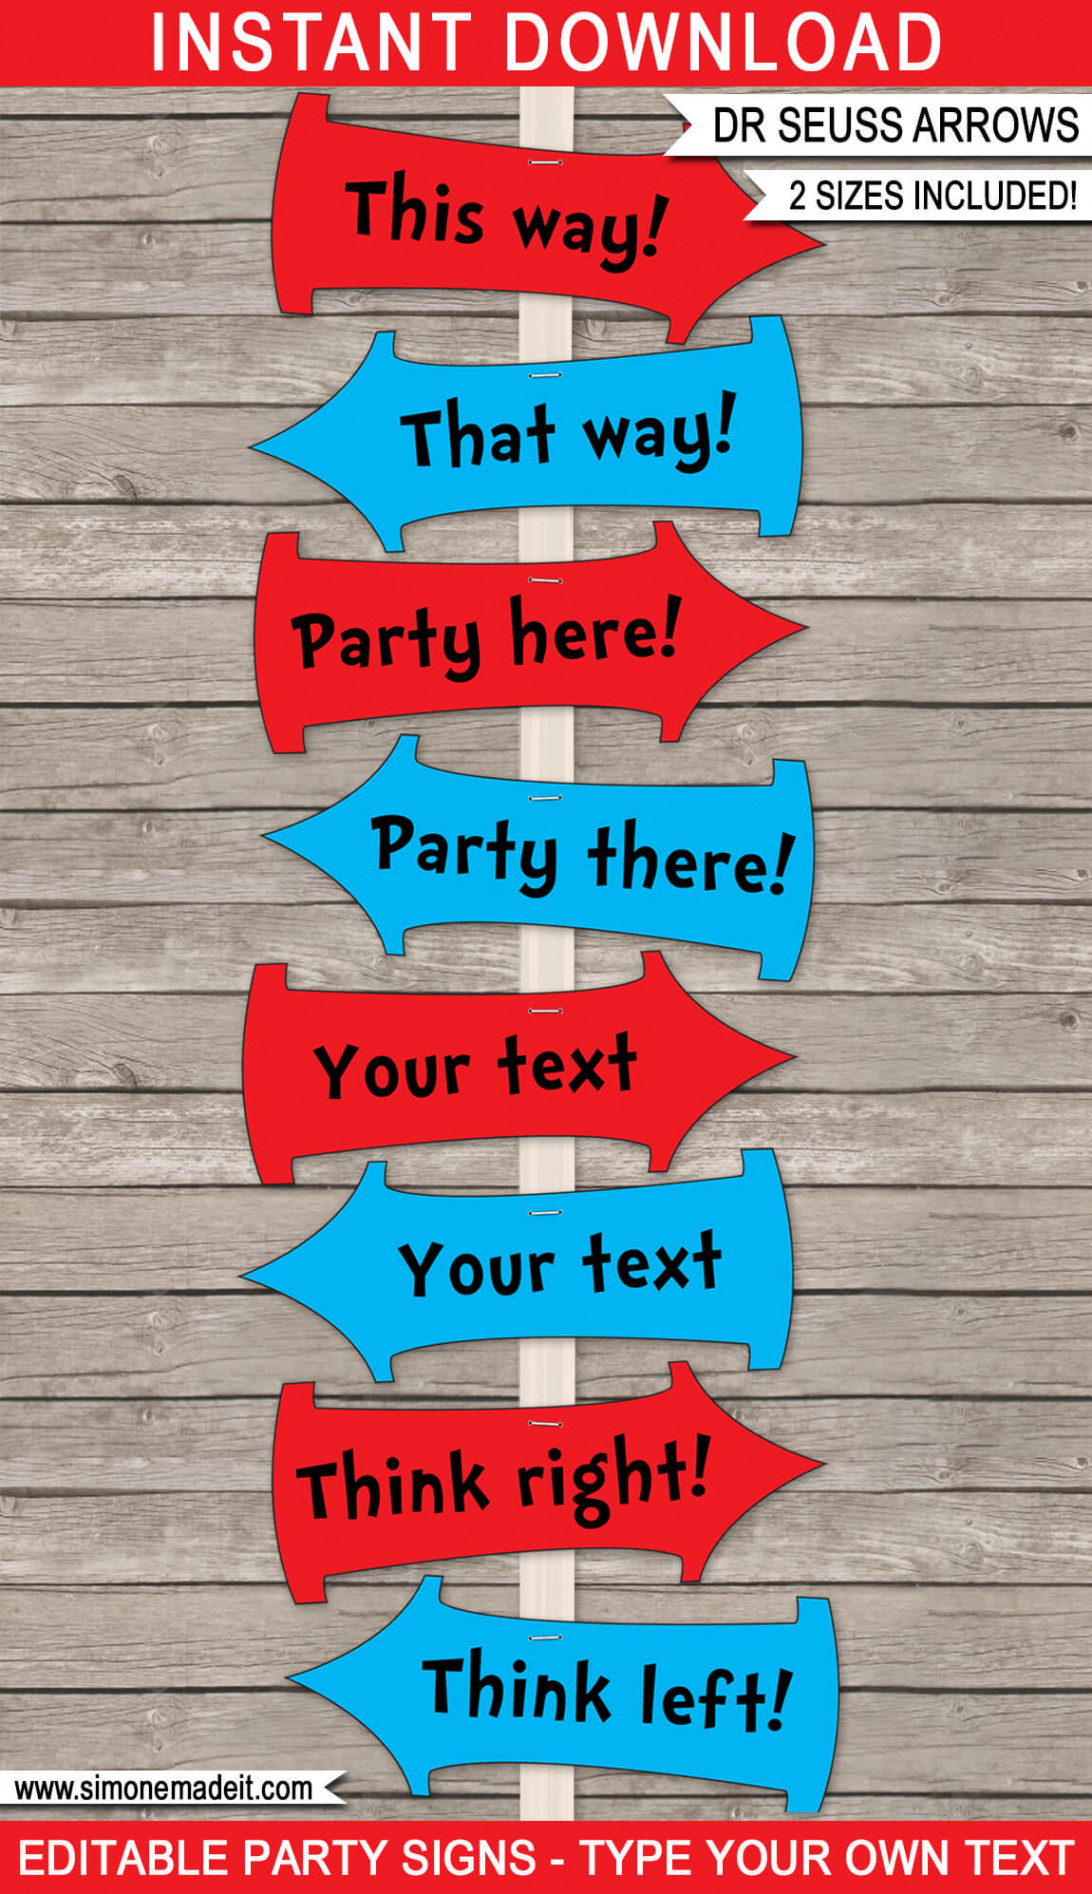 Dr Seuss Party Directional Signs - Arrows